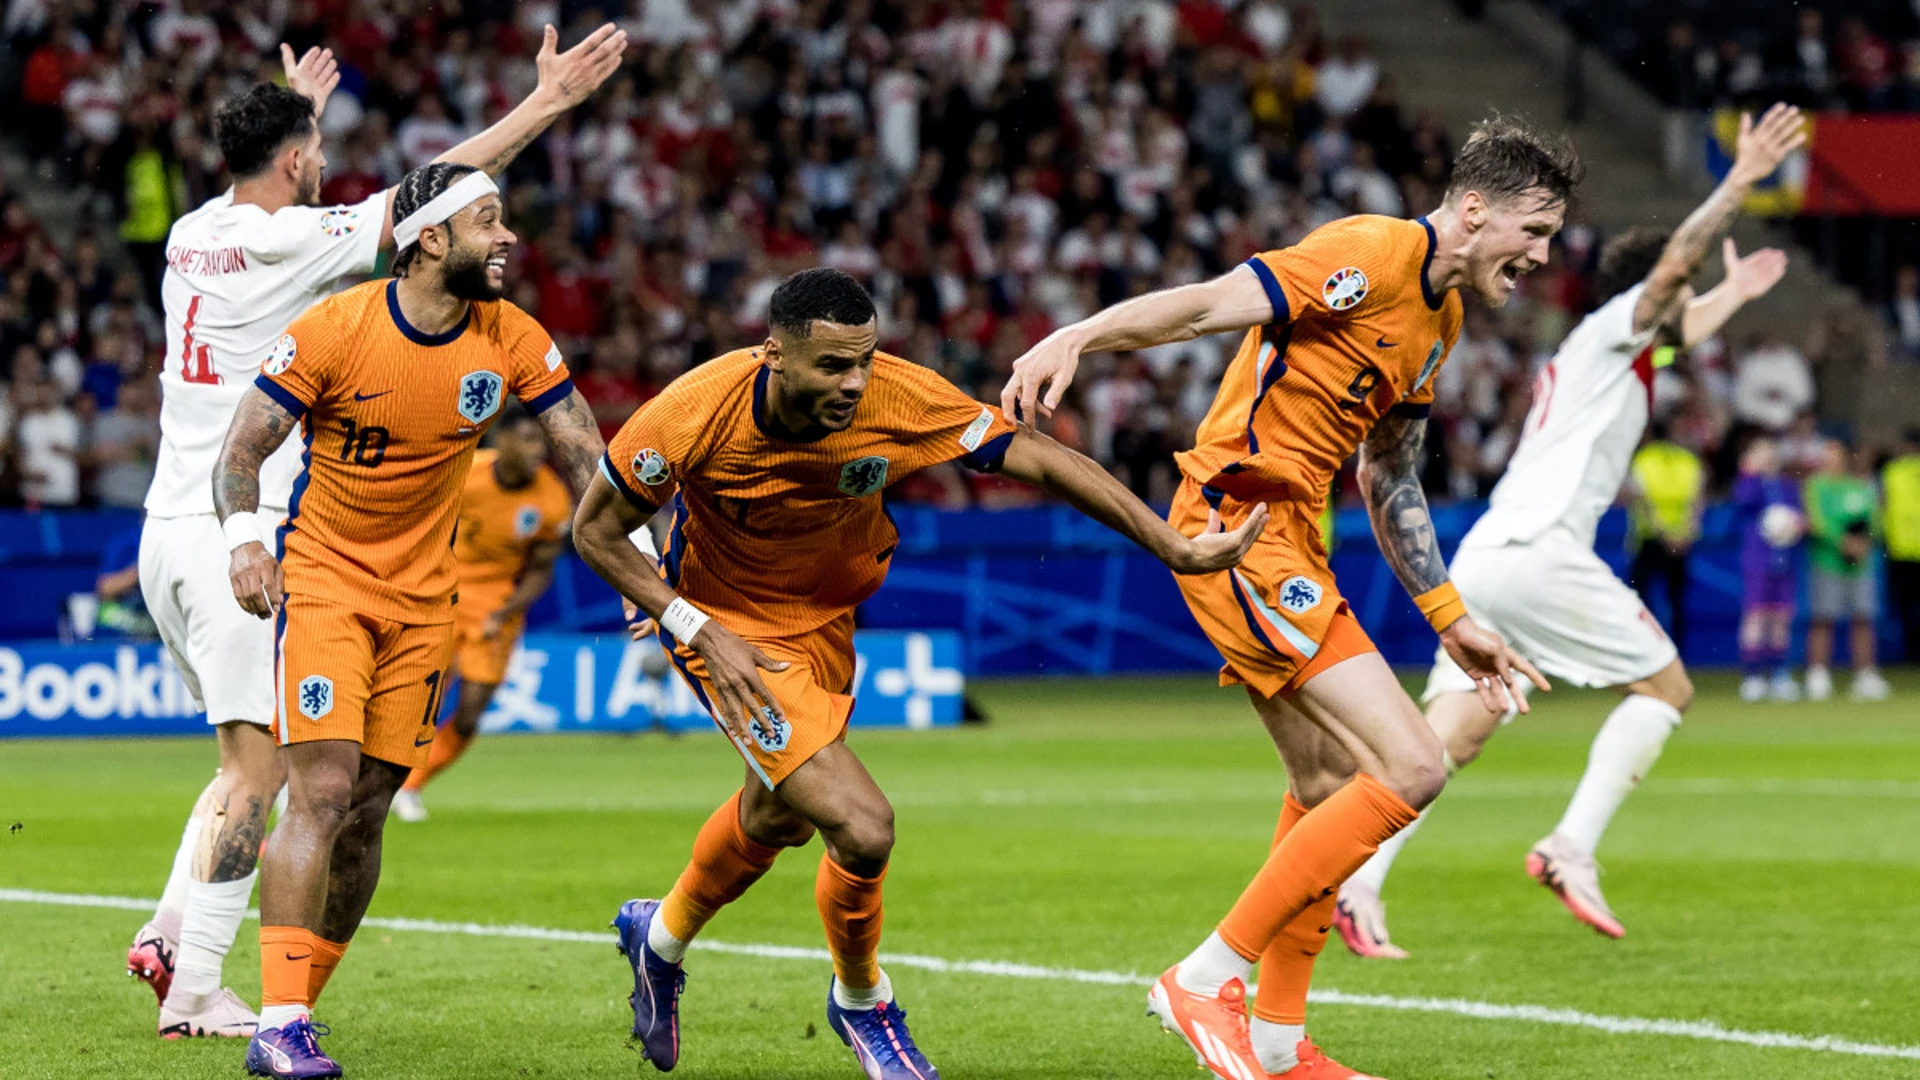 Winger Gakpo goal drive proves key for Dutch run to last four